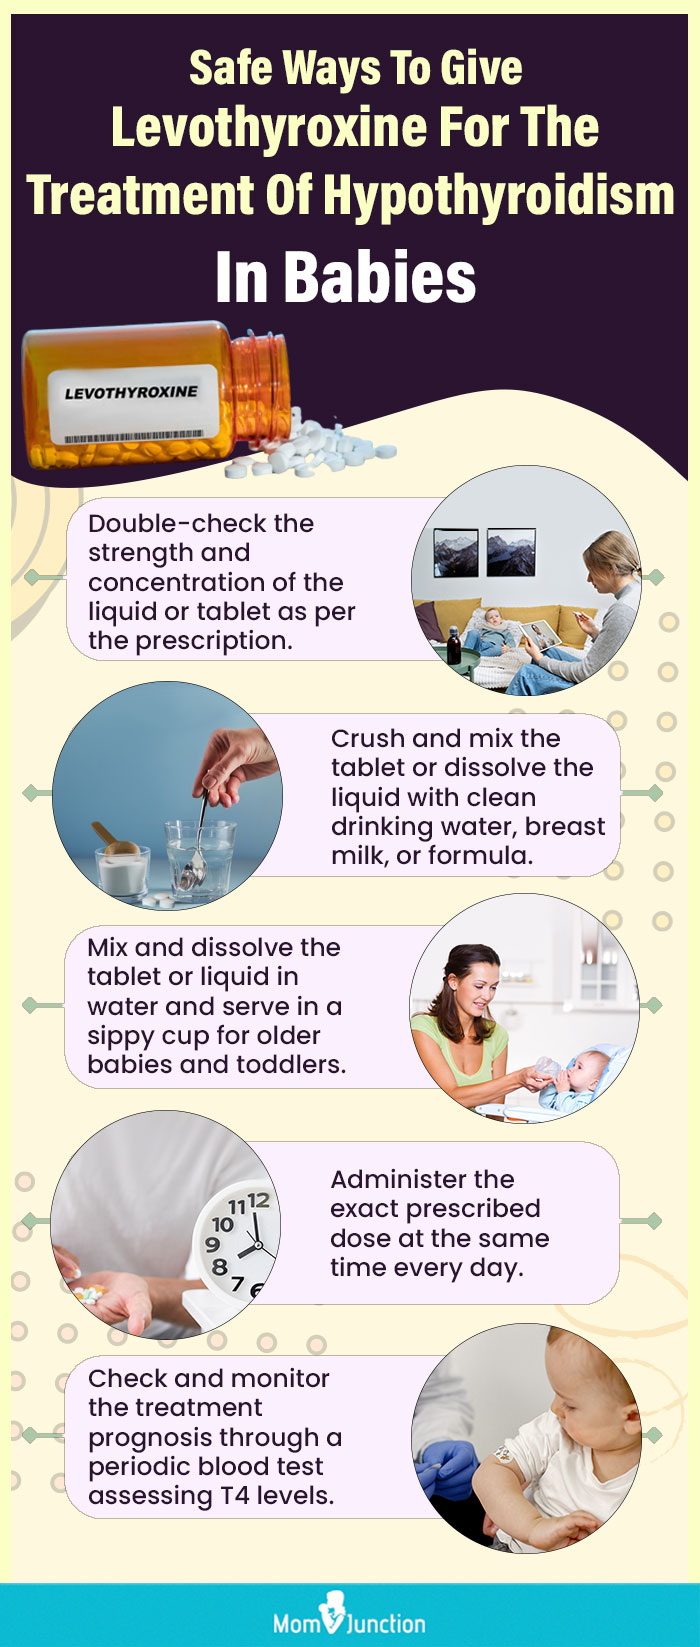 safe ways to give levothyroxine for the treatment of hypothyroidism in babies (infographic)